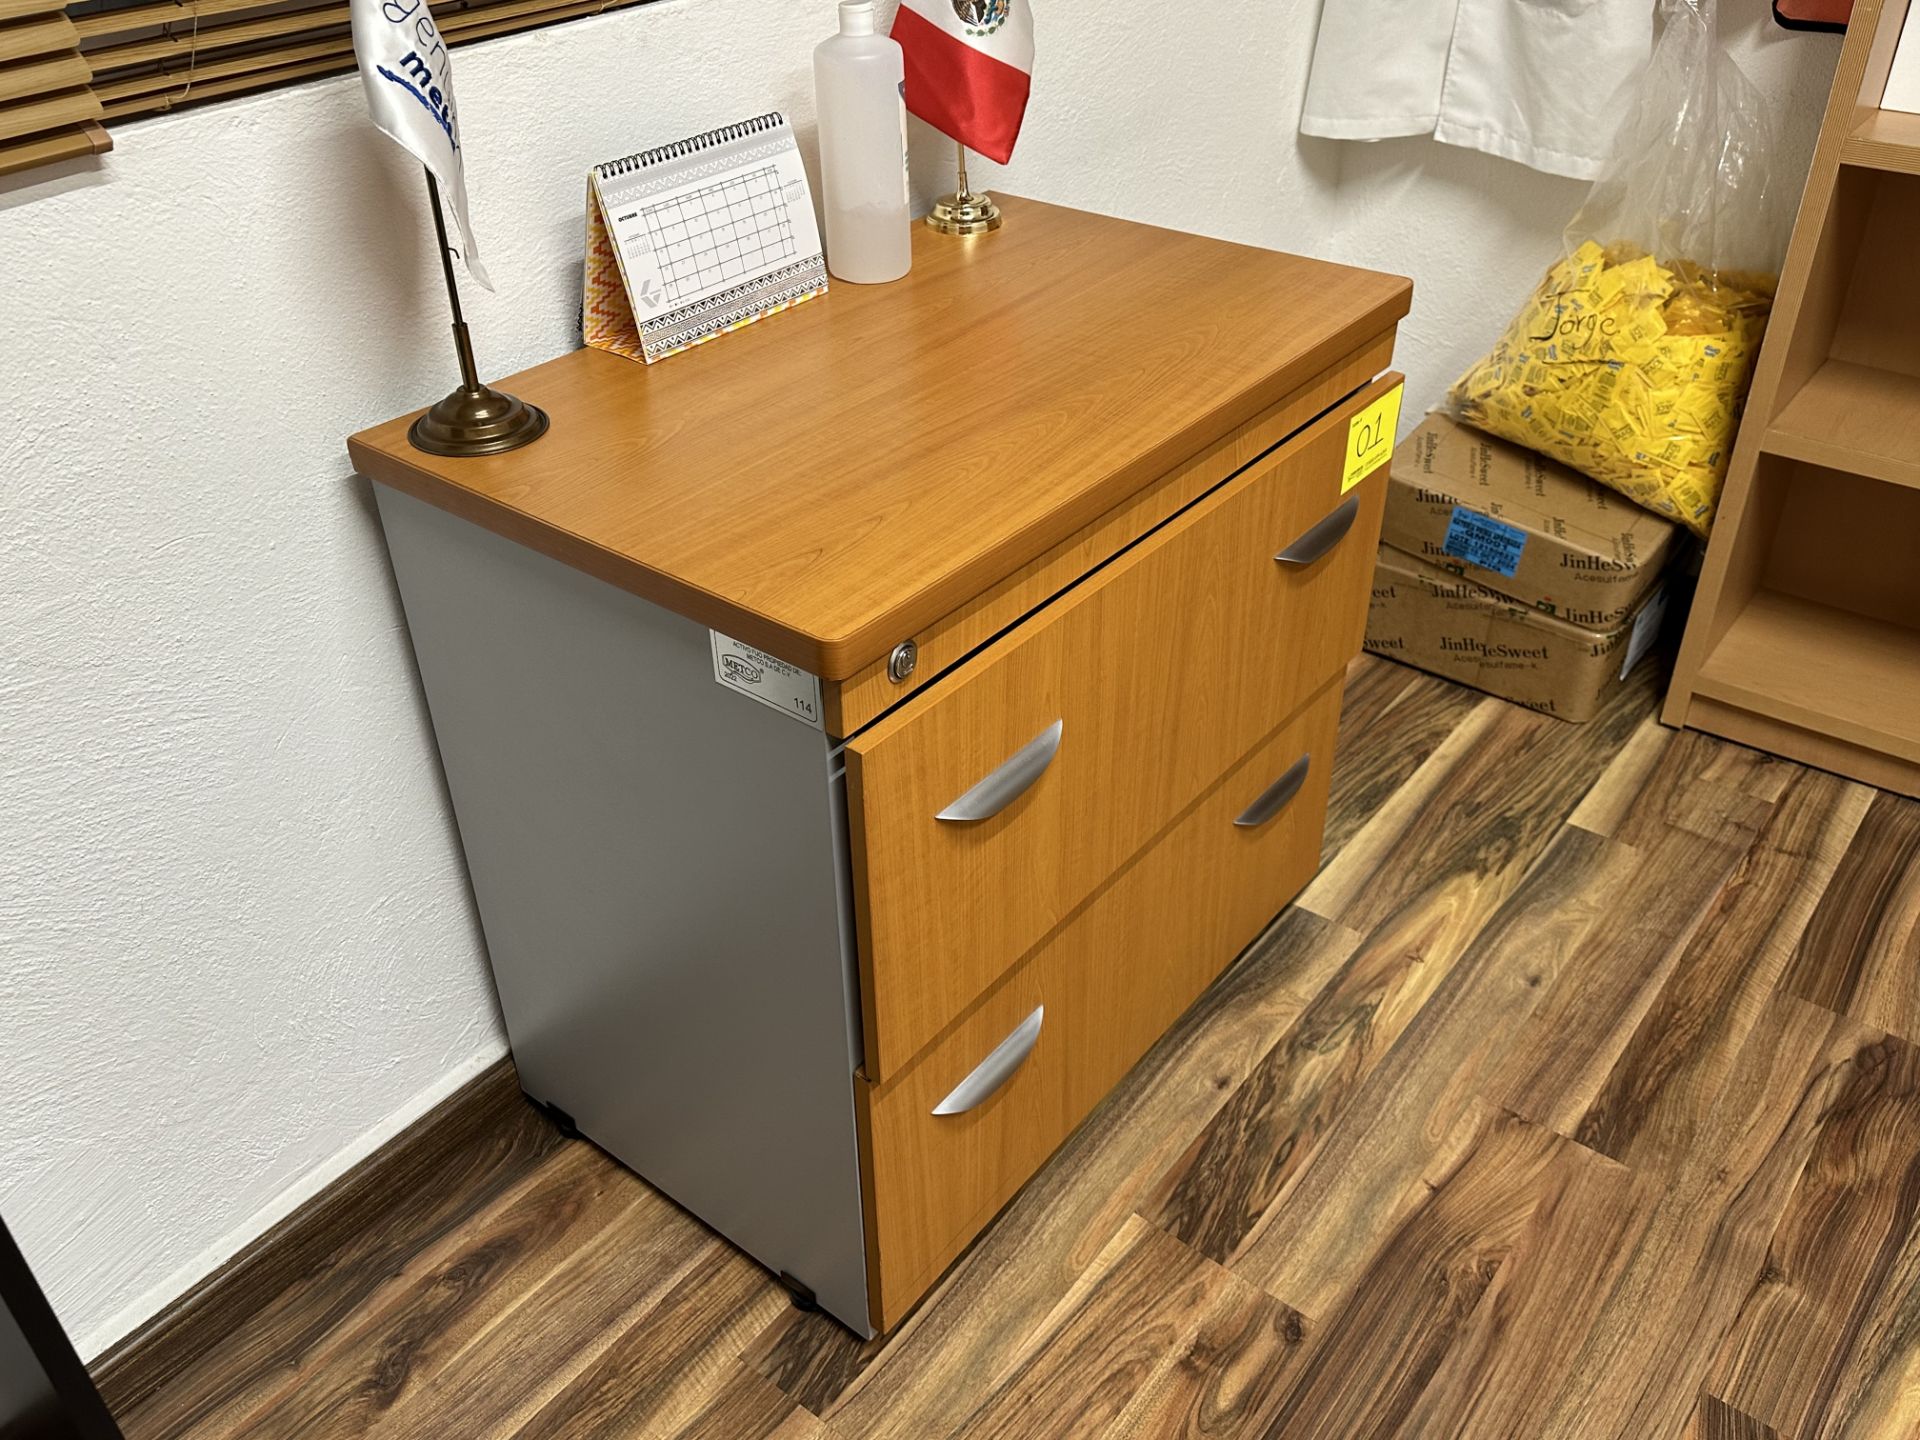 Lot of office furniture includes: 1 Desk in brown wood measures approximately 1.50 x 0.60 x 0.75 m; - Image 11 of 18